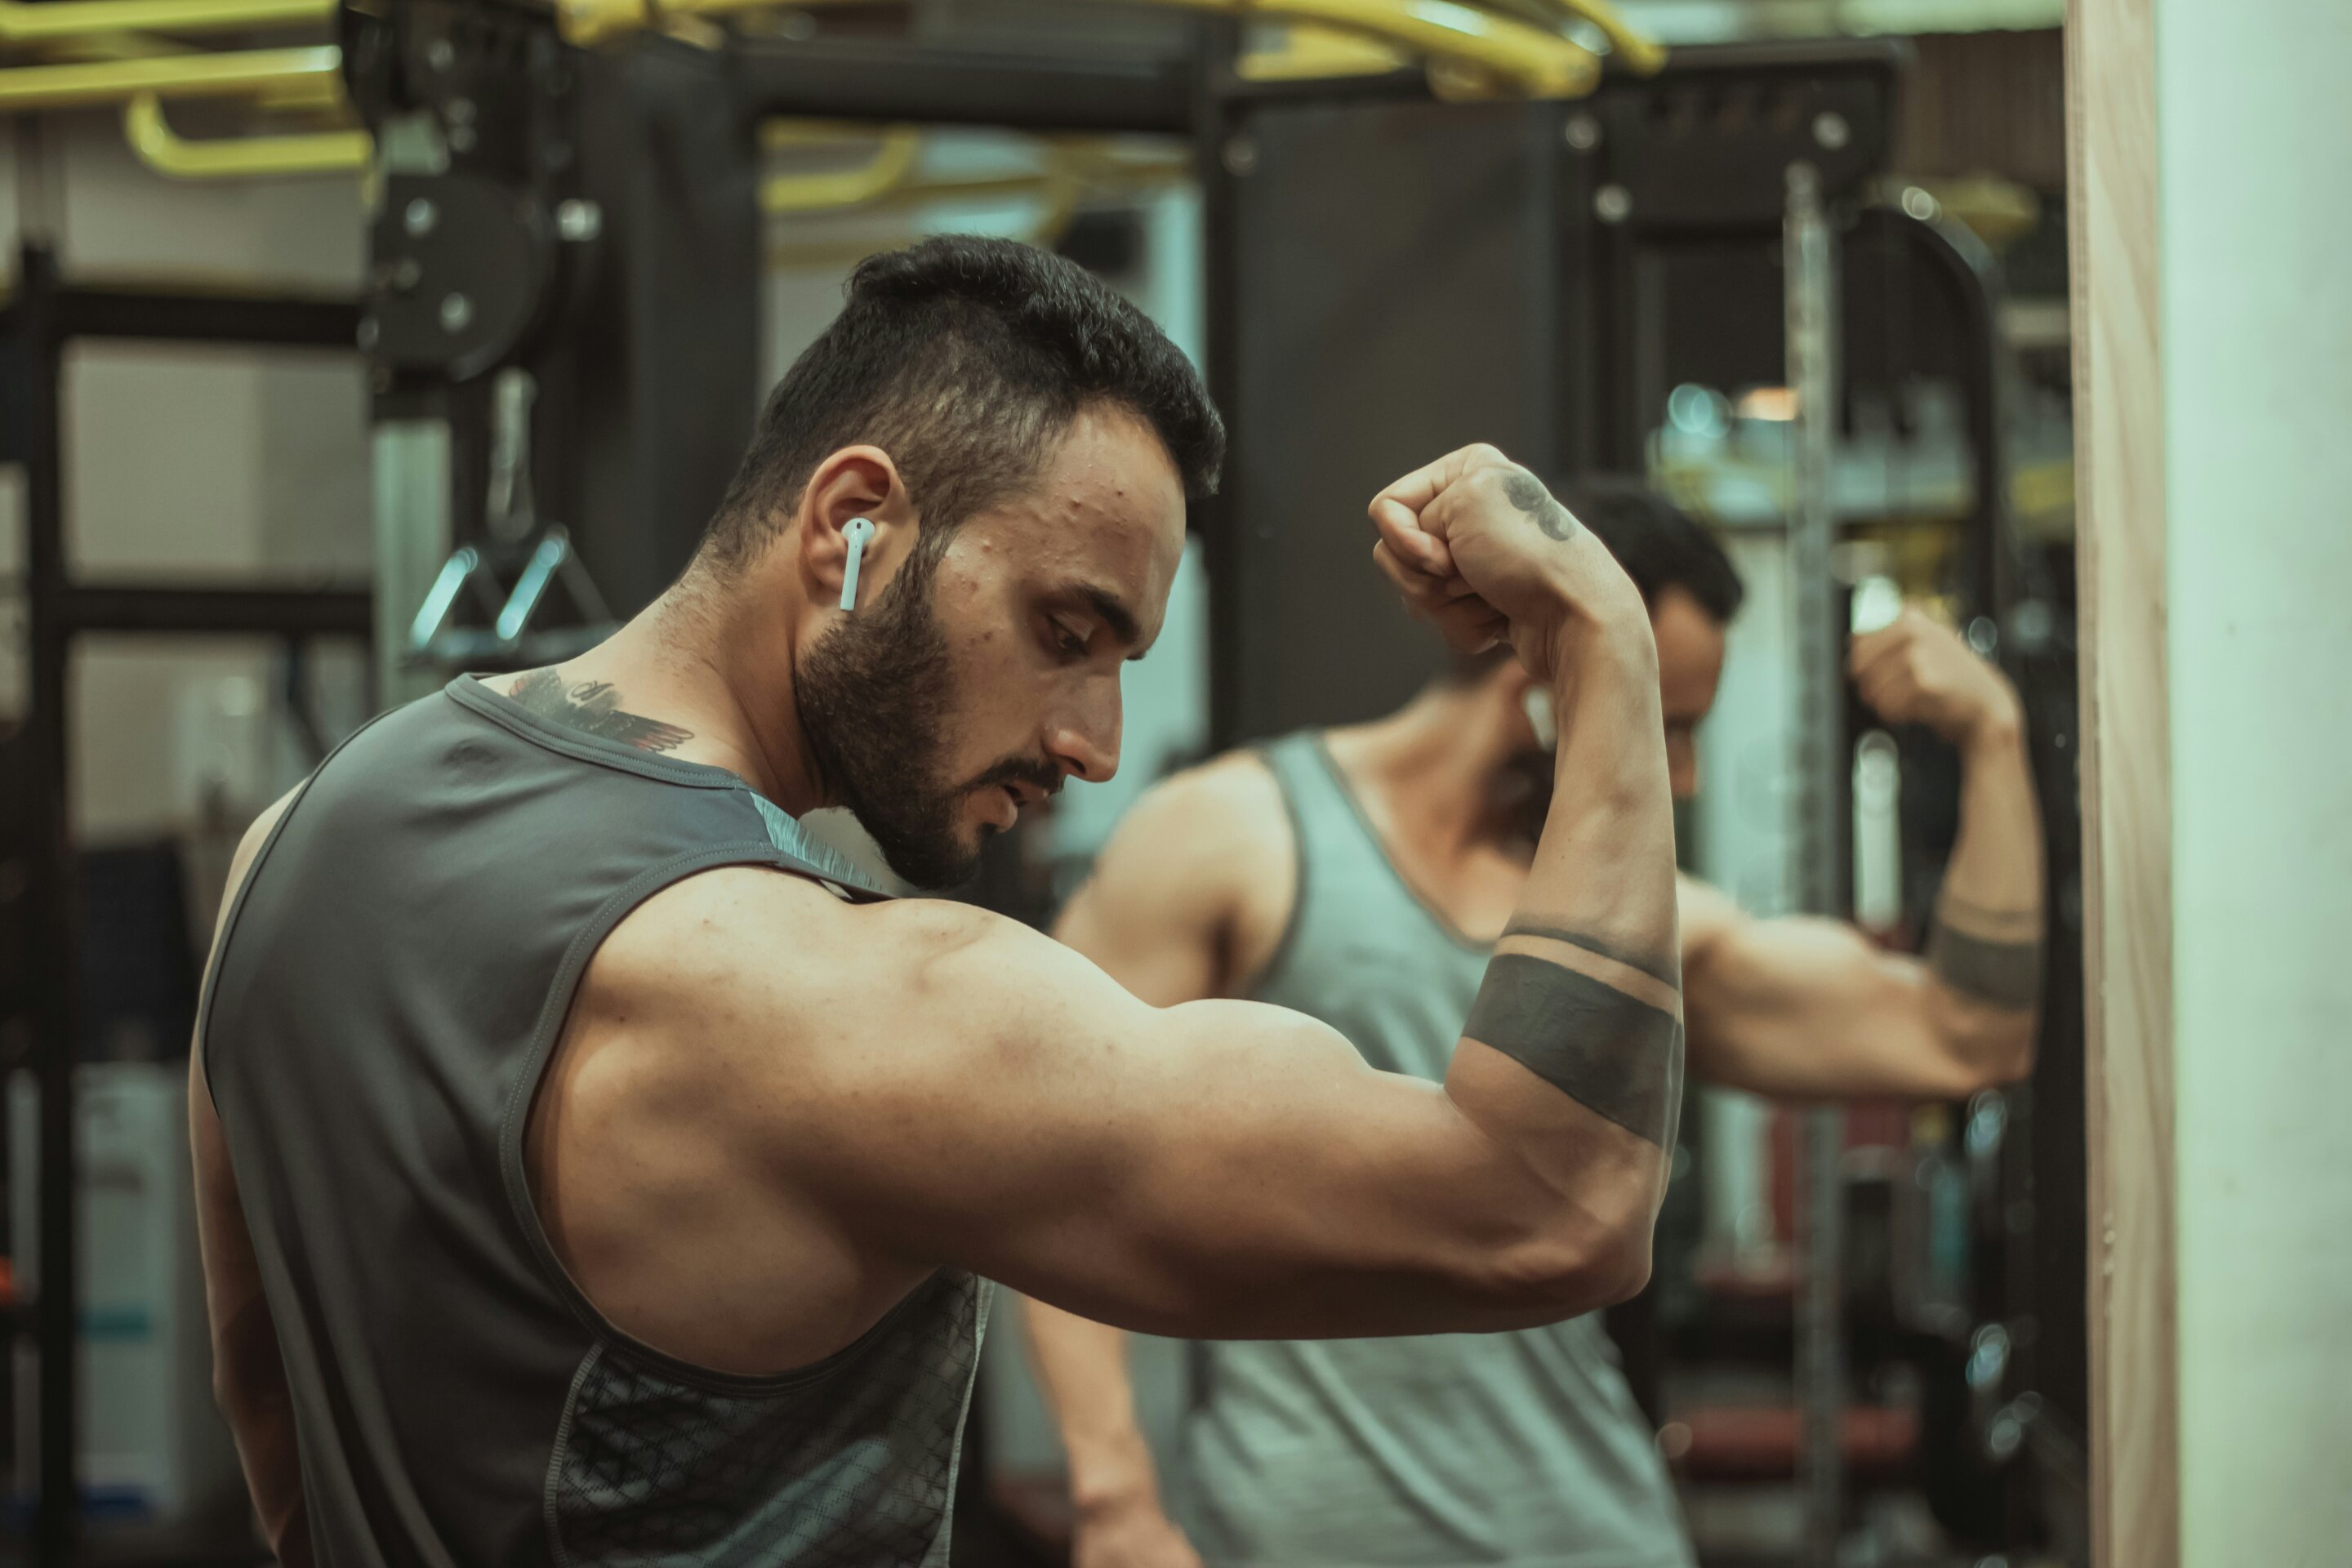 #Why gymgoers should be wary of using testosterone supplements to boost their gains